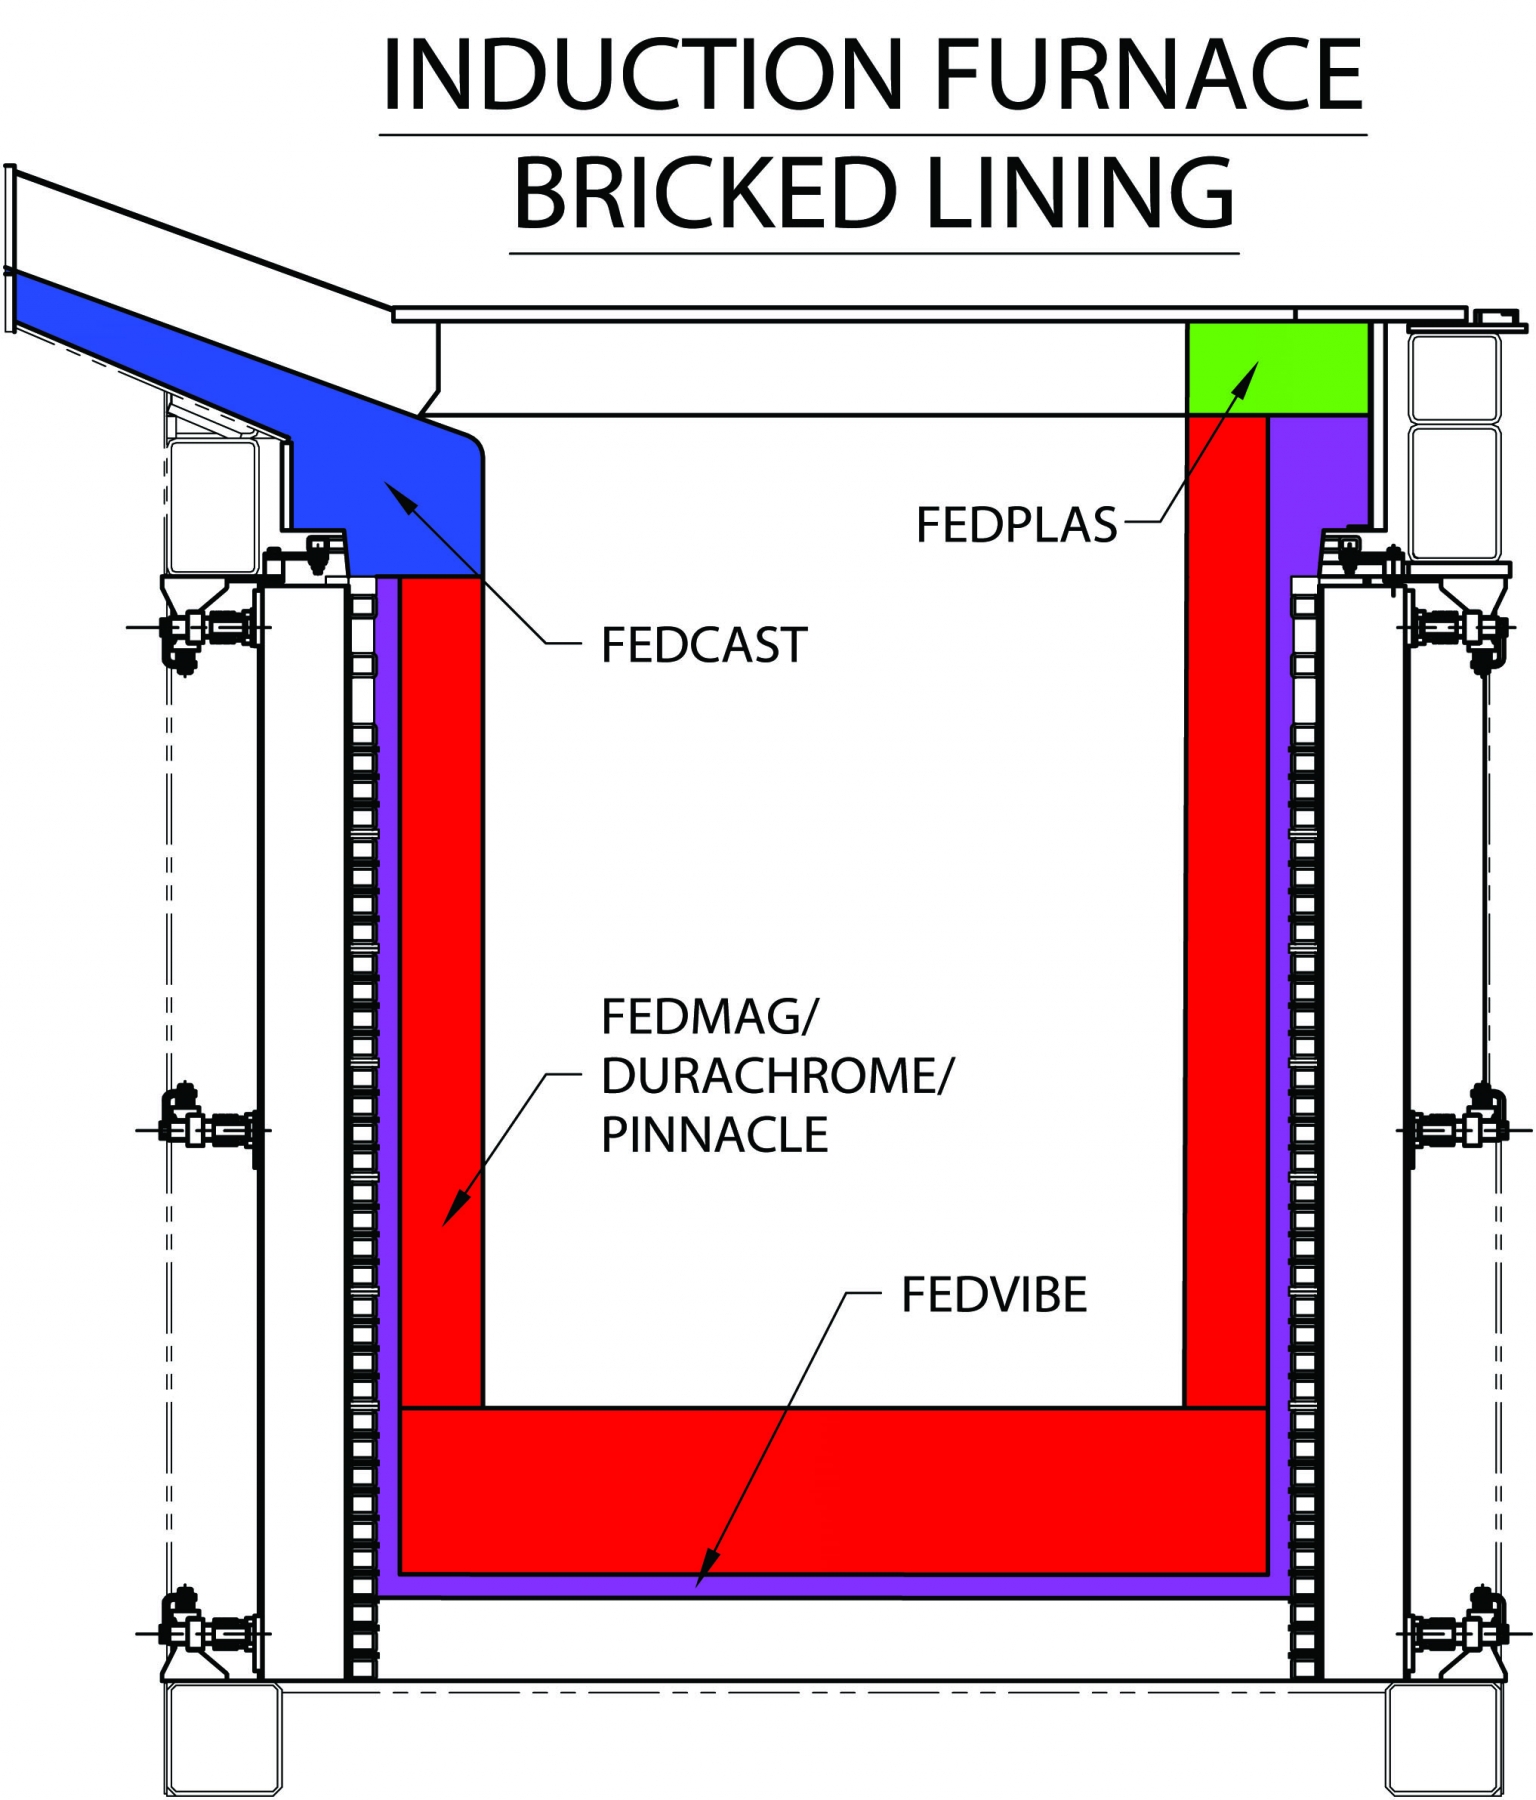 diagram showing induction furnace bricked lining